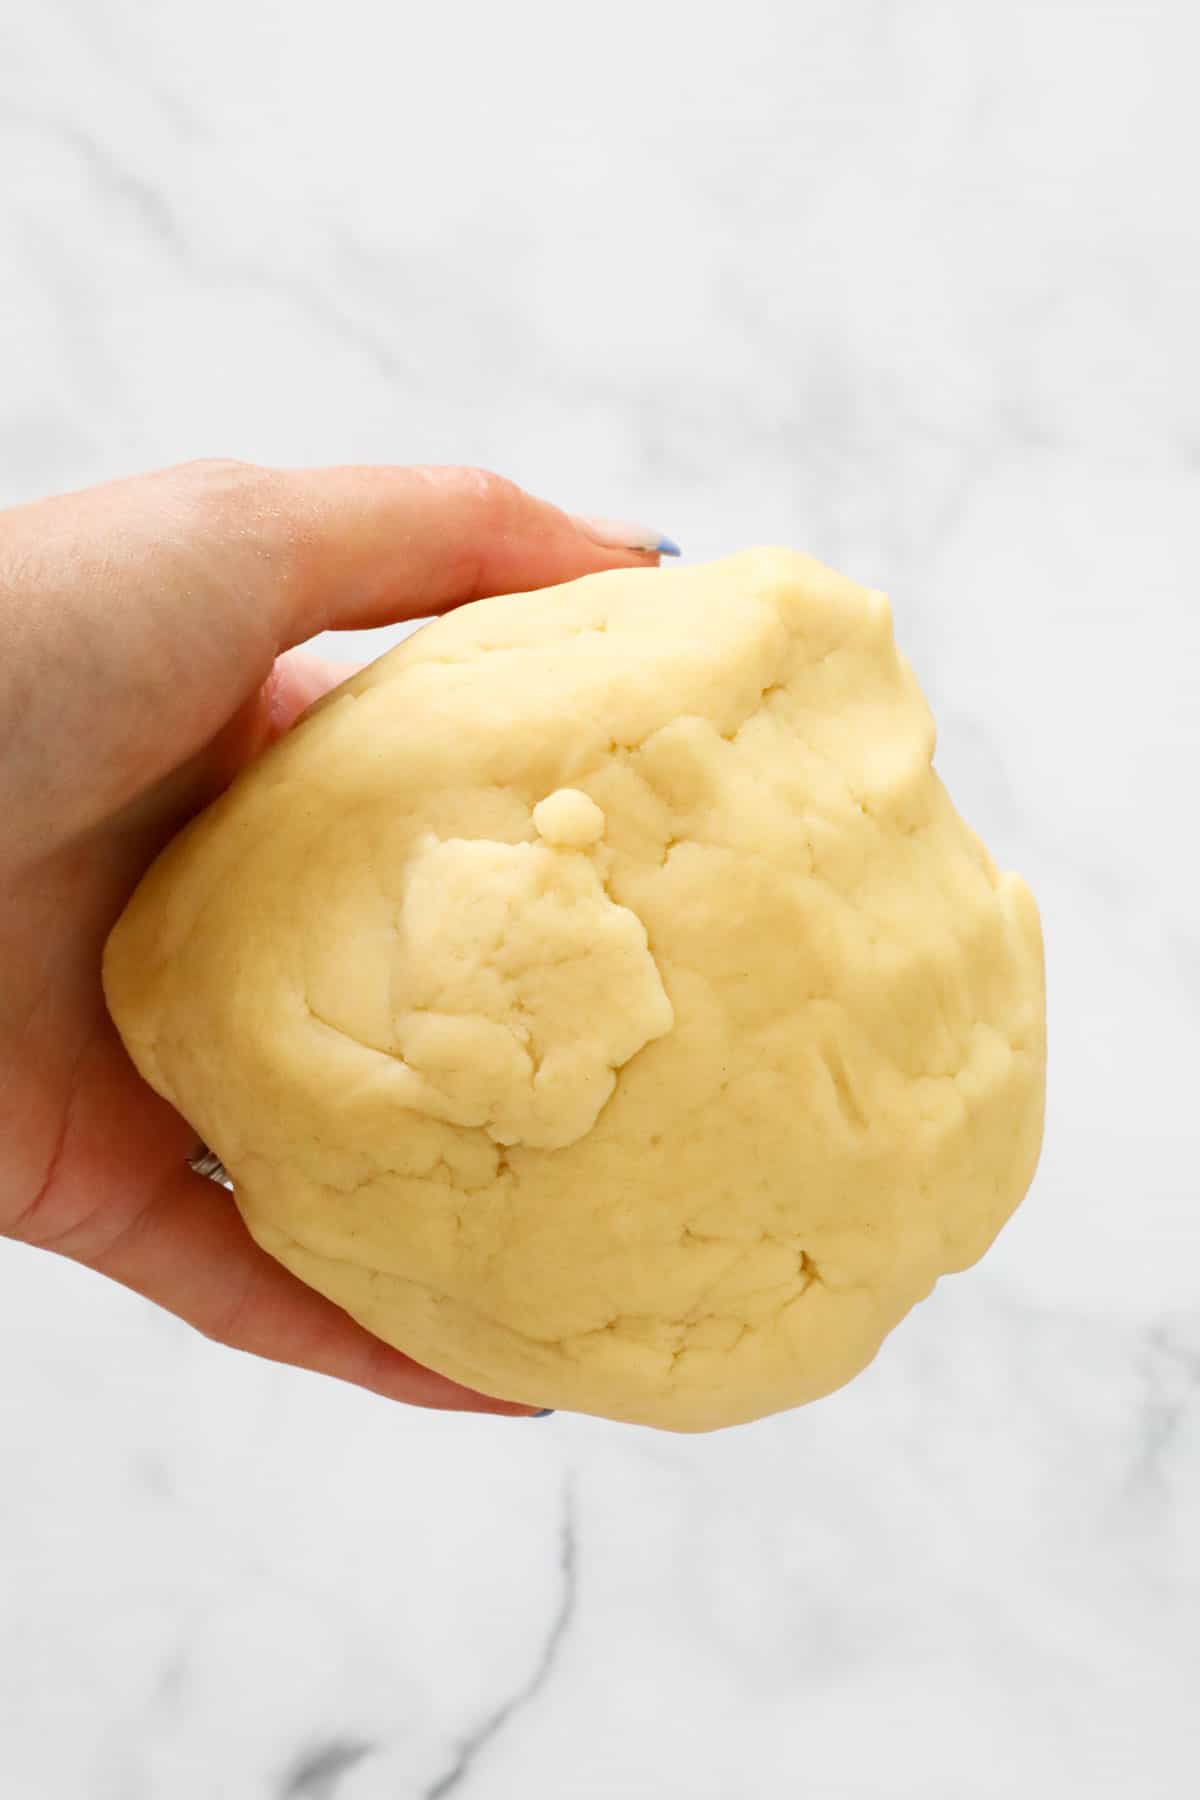 A hand holding a ball of pastry dough.